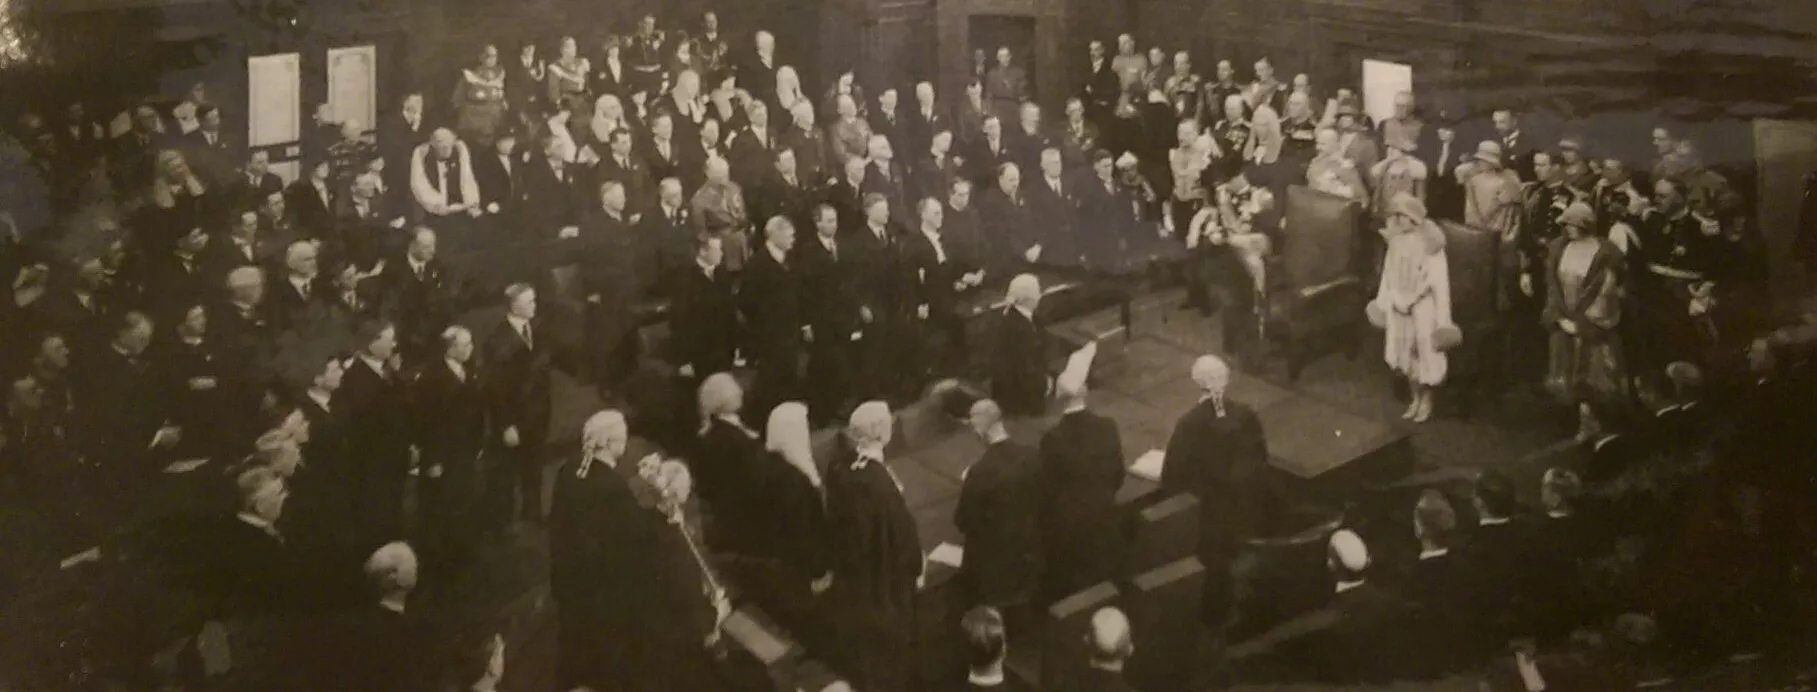 This black and white photograph shows the Duke of York reading a message from his father the King in the Senate Chamber. The room is crowded with at least 200 people, mostly men with some women all wearing their best. Men are dressed in suits, military uniform or gowns and wigs while the women wear formal dresses with hats and gloves. The crowd is in a horseshoe shape around the central table while the Duke stands at the head of the table.